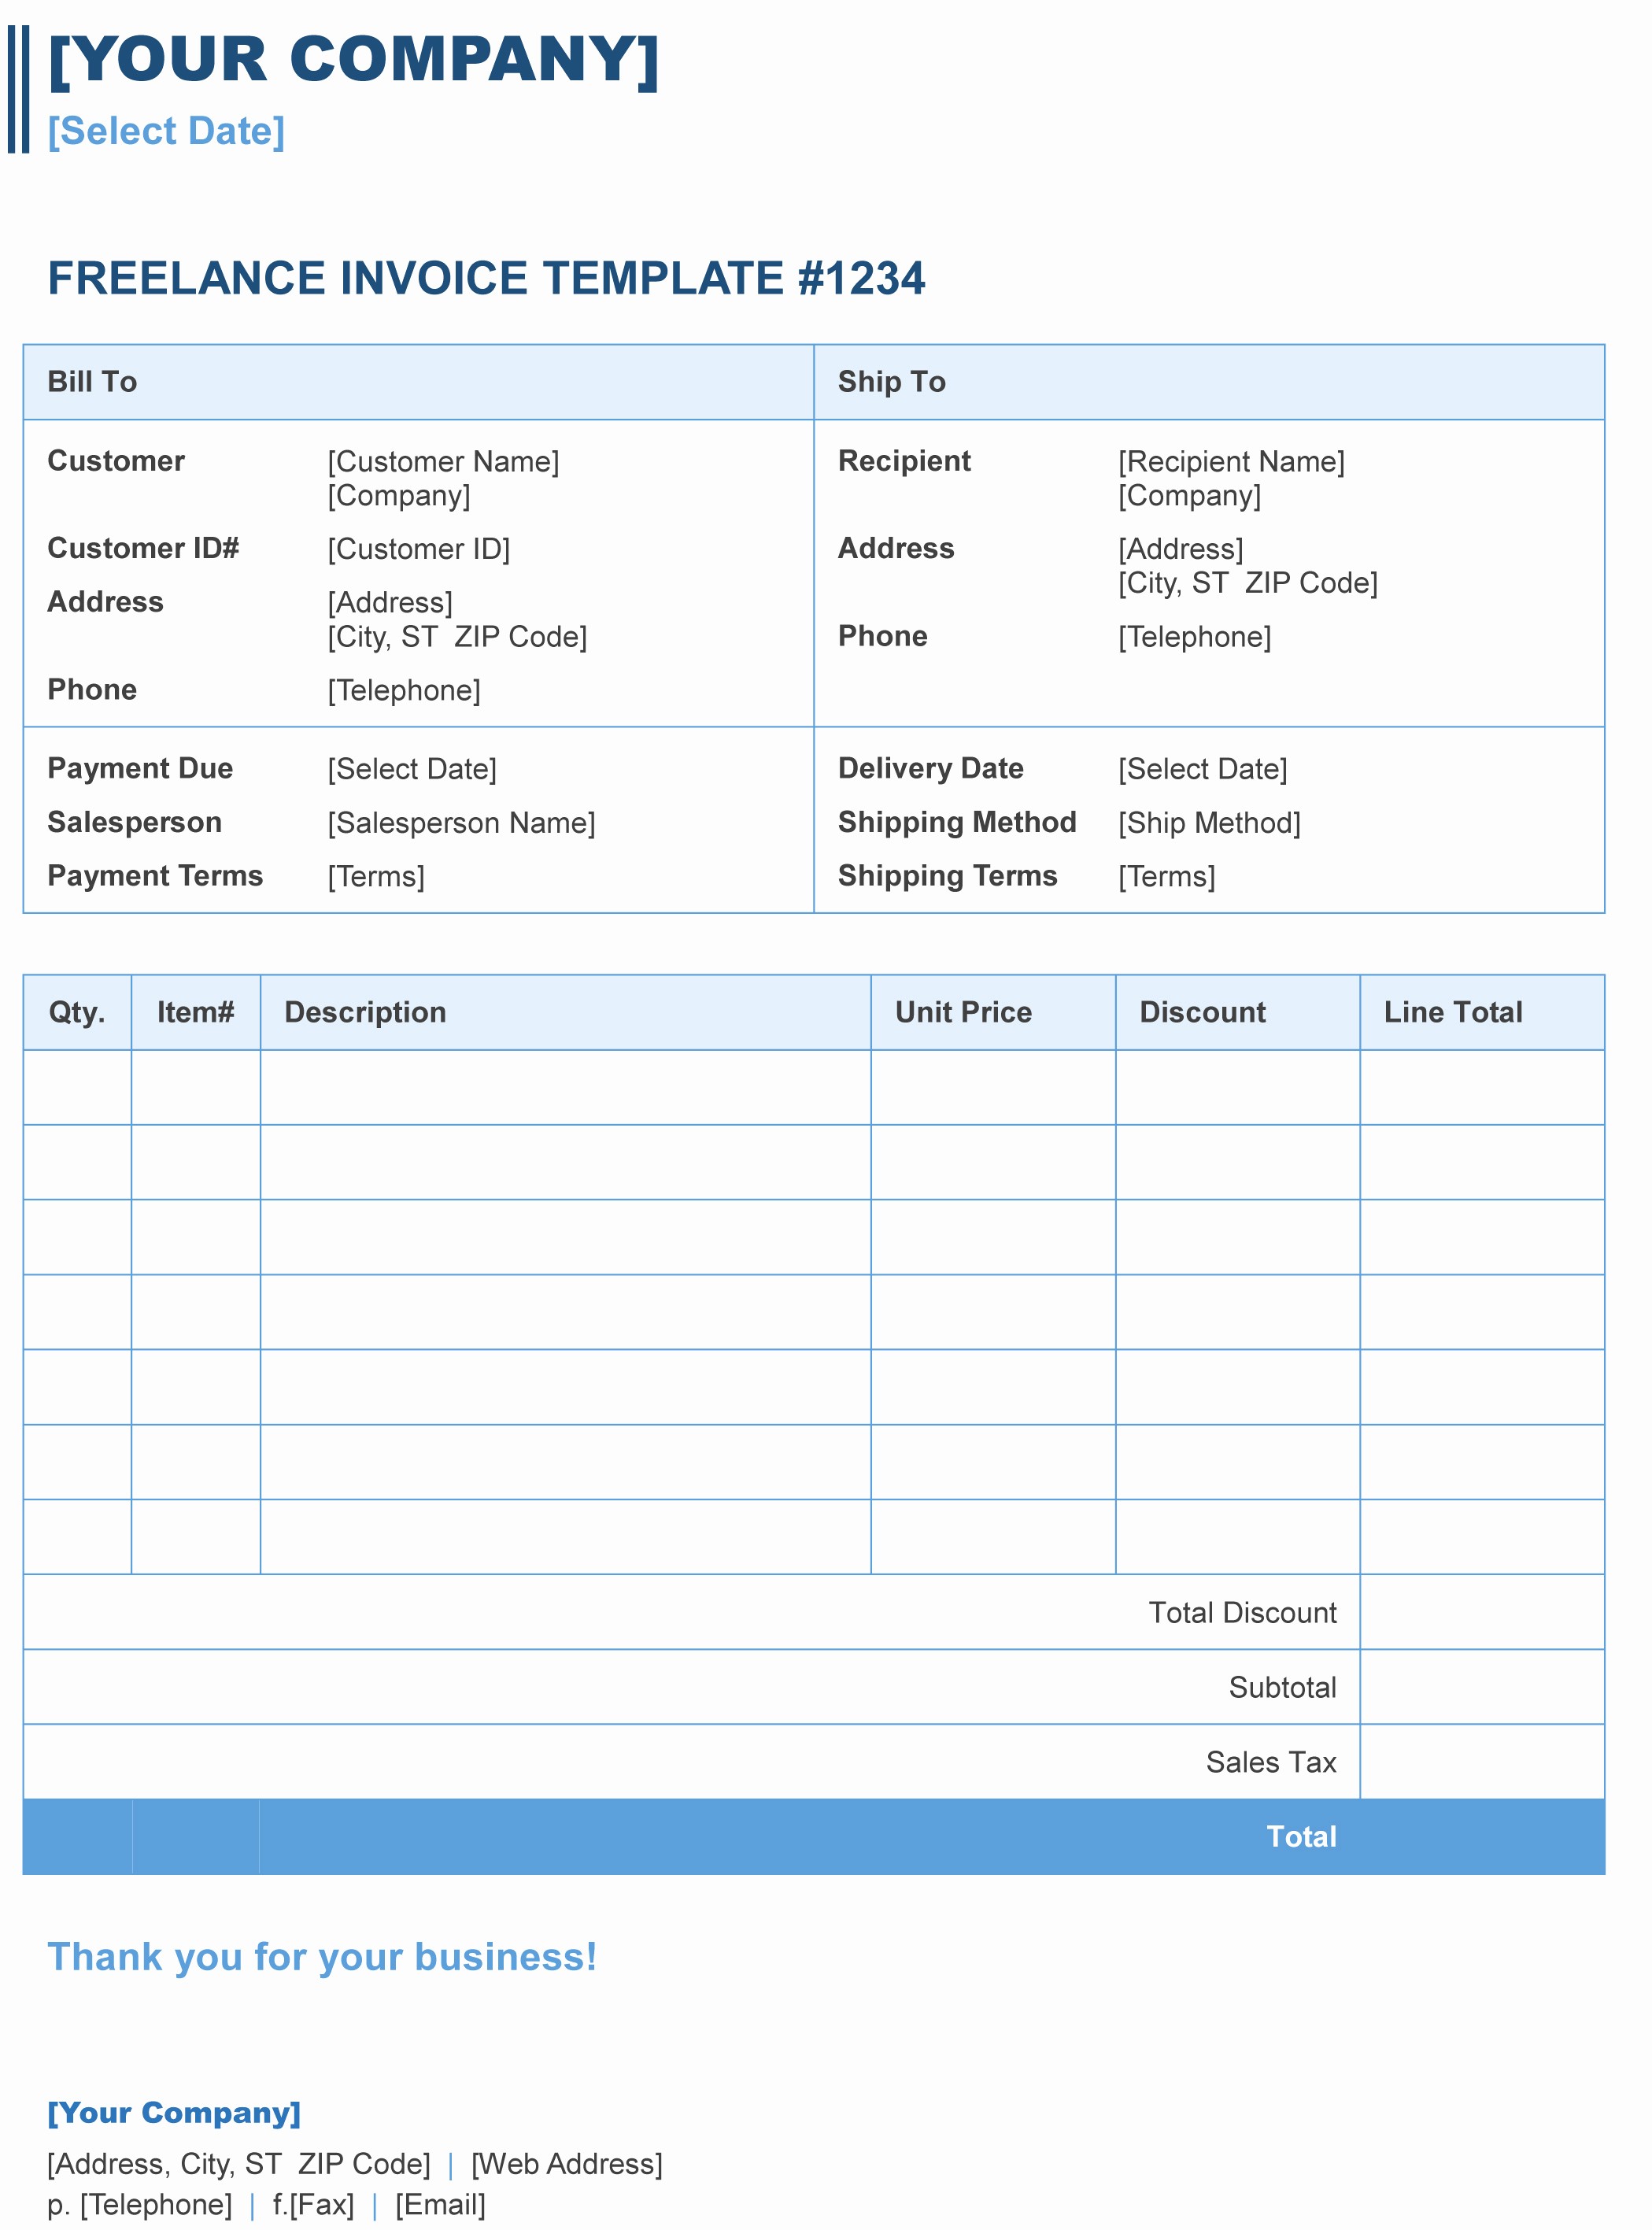 Free Invoice Template for Word Lovely Microsoft Word Invoice Template